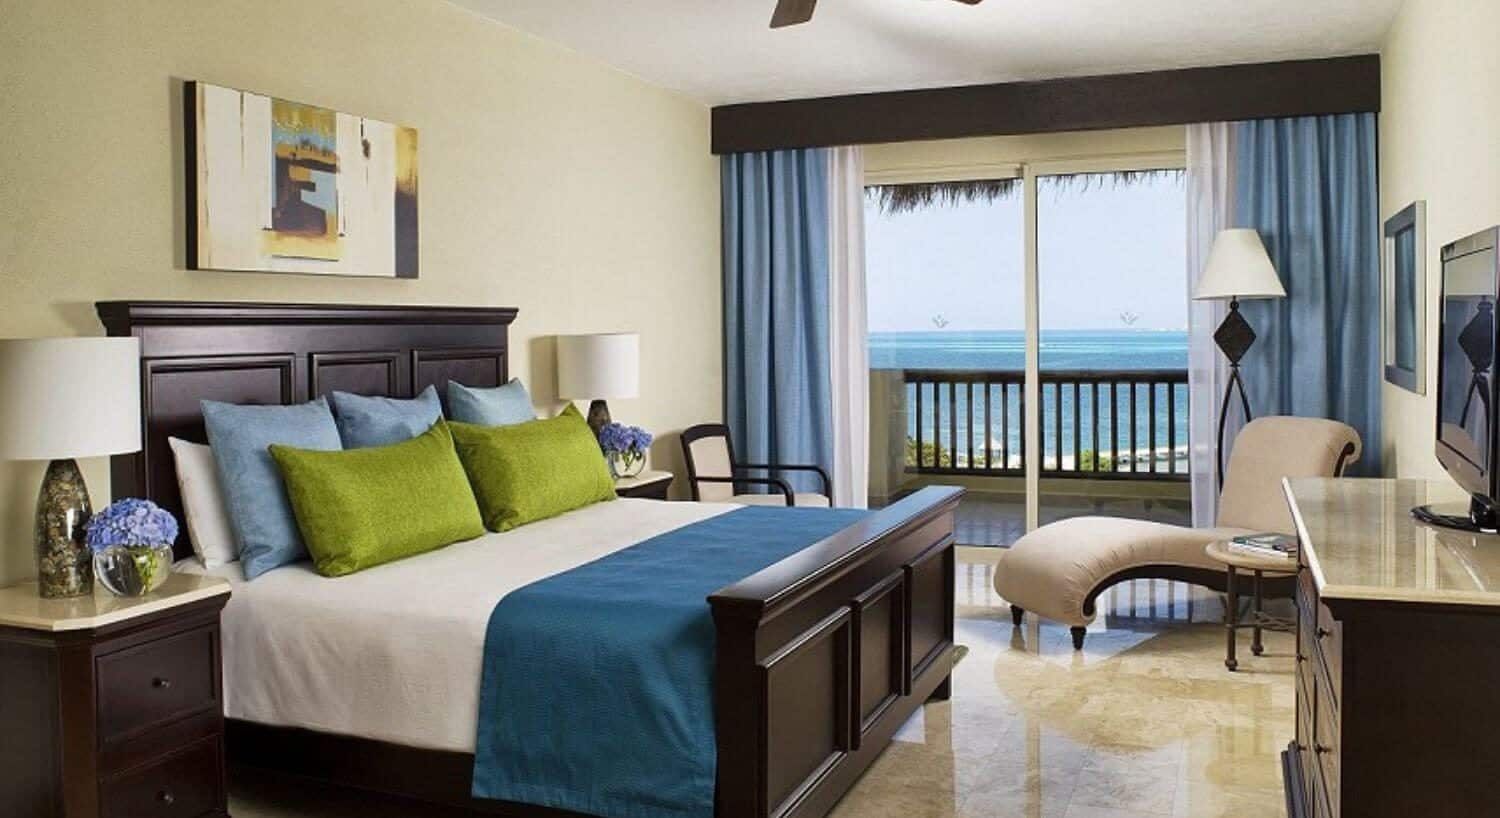 A bedroom with a King bed with white, glue and green bedding, a rich deep brown headboard and footboard, nightstands and lamps on either side of the bed, a dresser and flat screen TV on the opposite wall, a chaise lounge, and sliding doors that lead out to a balcony with ocean views.